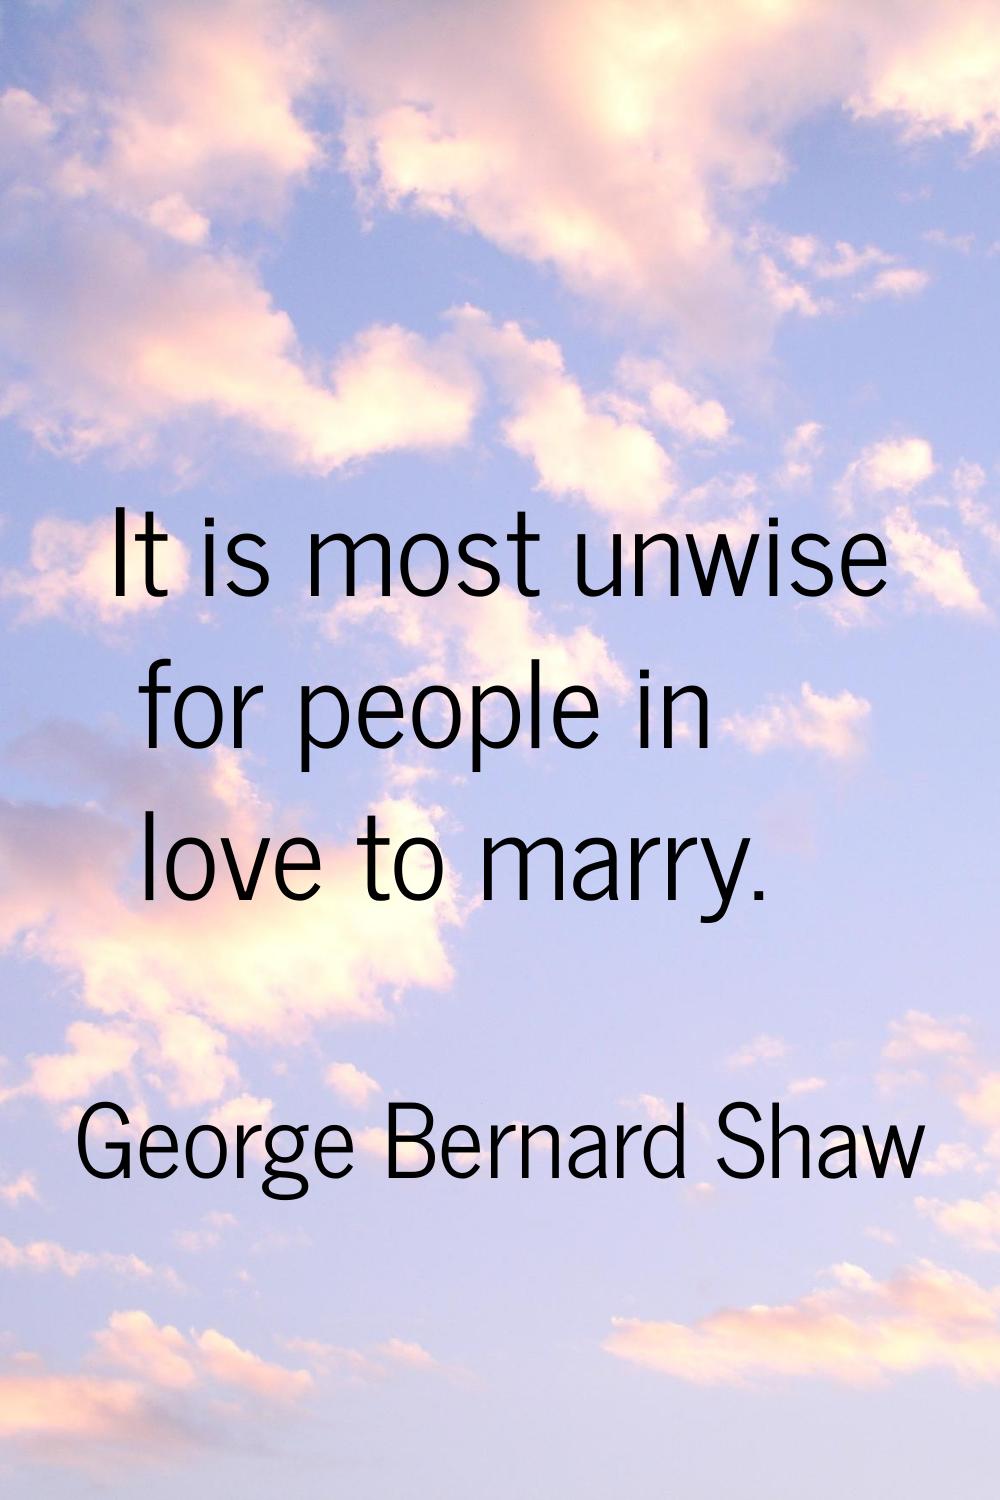 It is most unwise for people in love to marry.